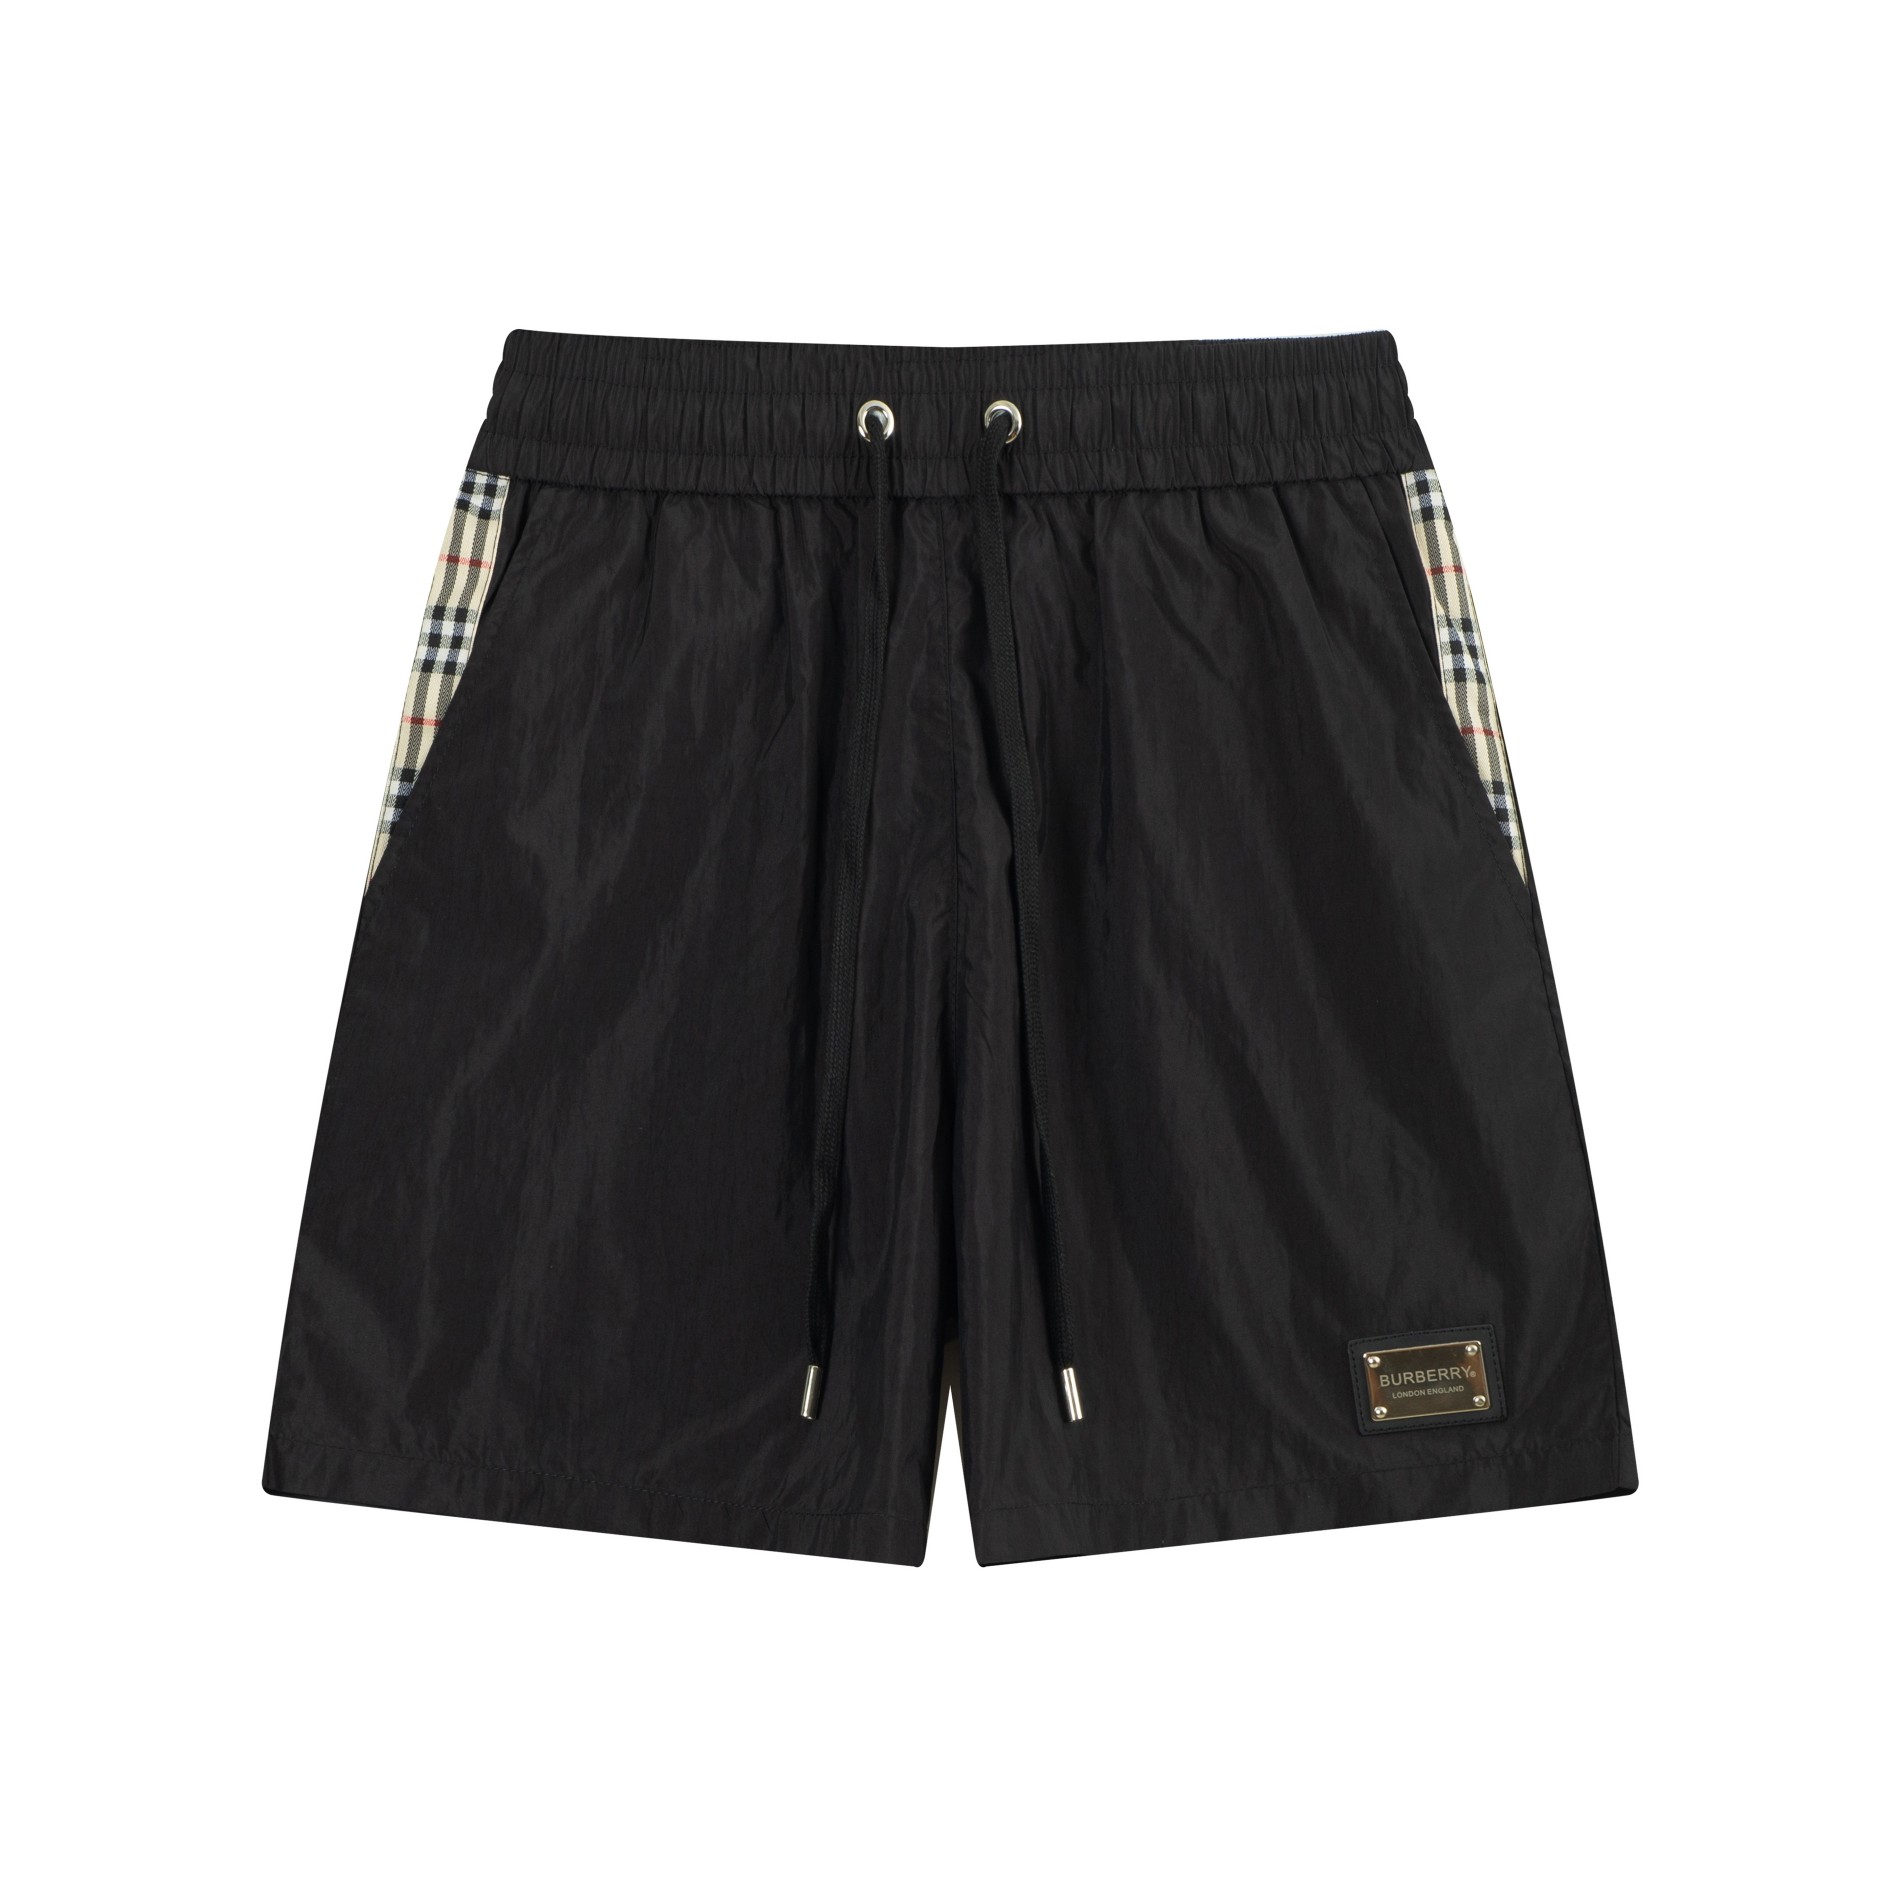 Burberry Clothing Shorts Black Polyester Summer Collection Fashion Beach